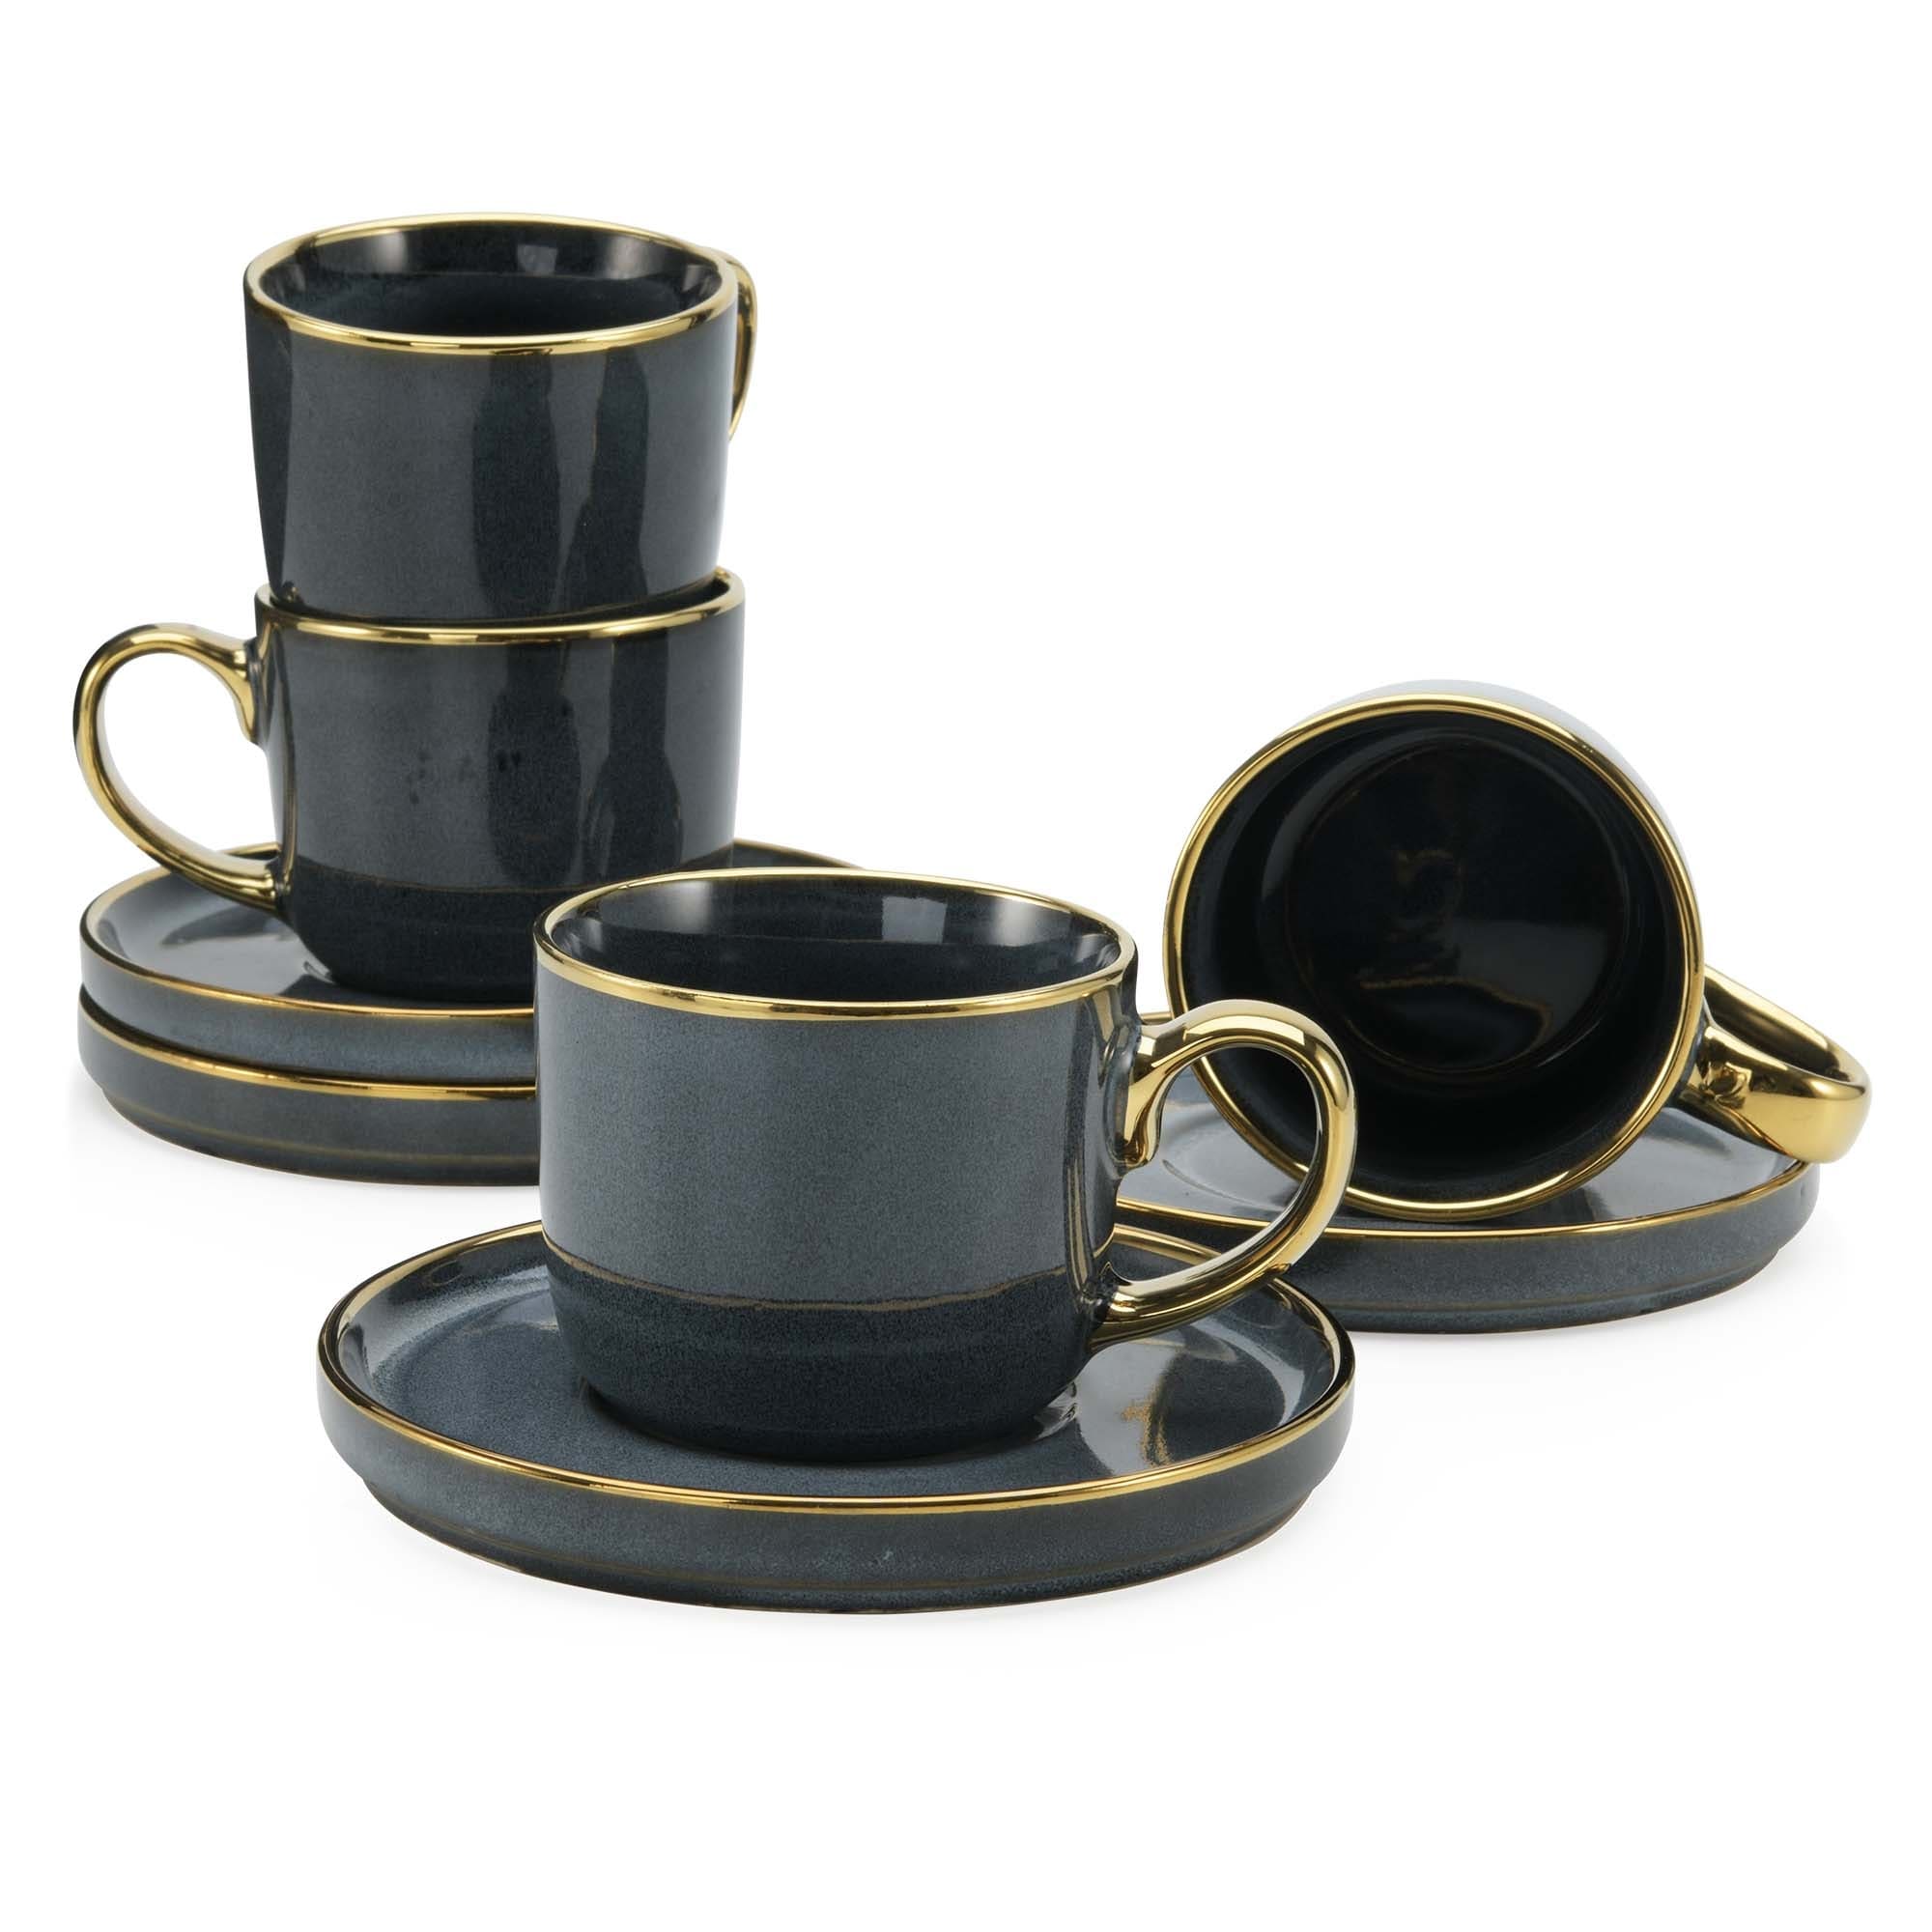 American Atelier Gold Rimmed Teacup and Saucer Set of 4 Ceramic